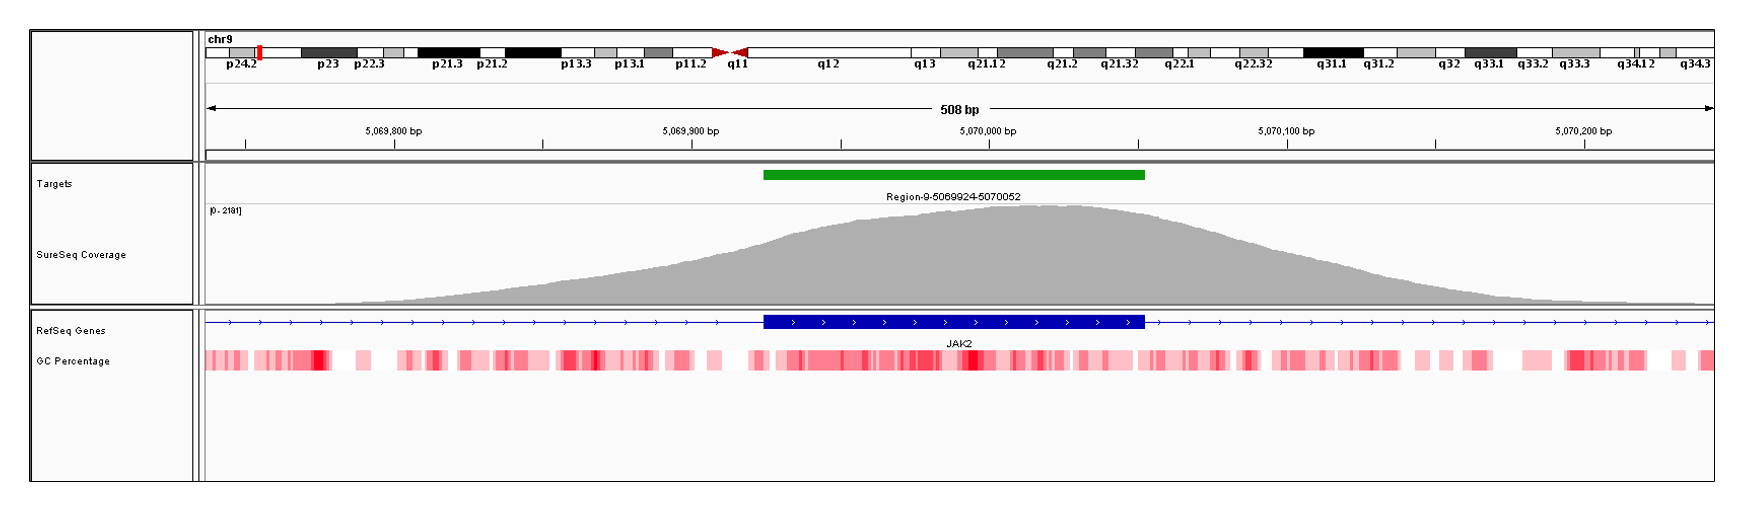 JAK2 Exon 12 (hg19 chr9:5069925-5070052). Depth of coverage per base (grey). Targeted region (green). Gene coding region as defined by RefSeq (blue). GC percentage (red). Image